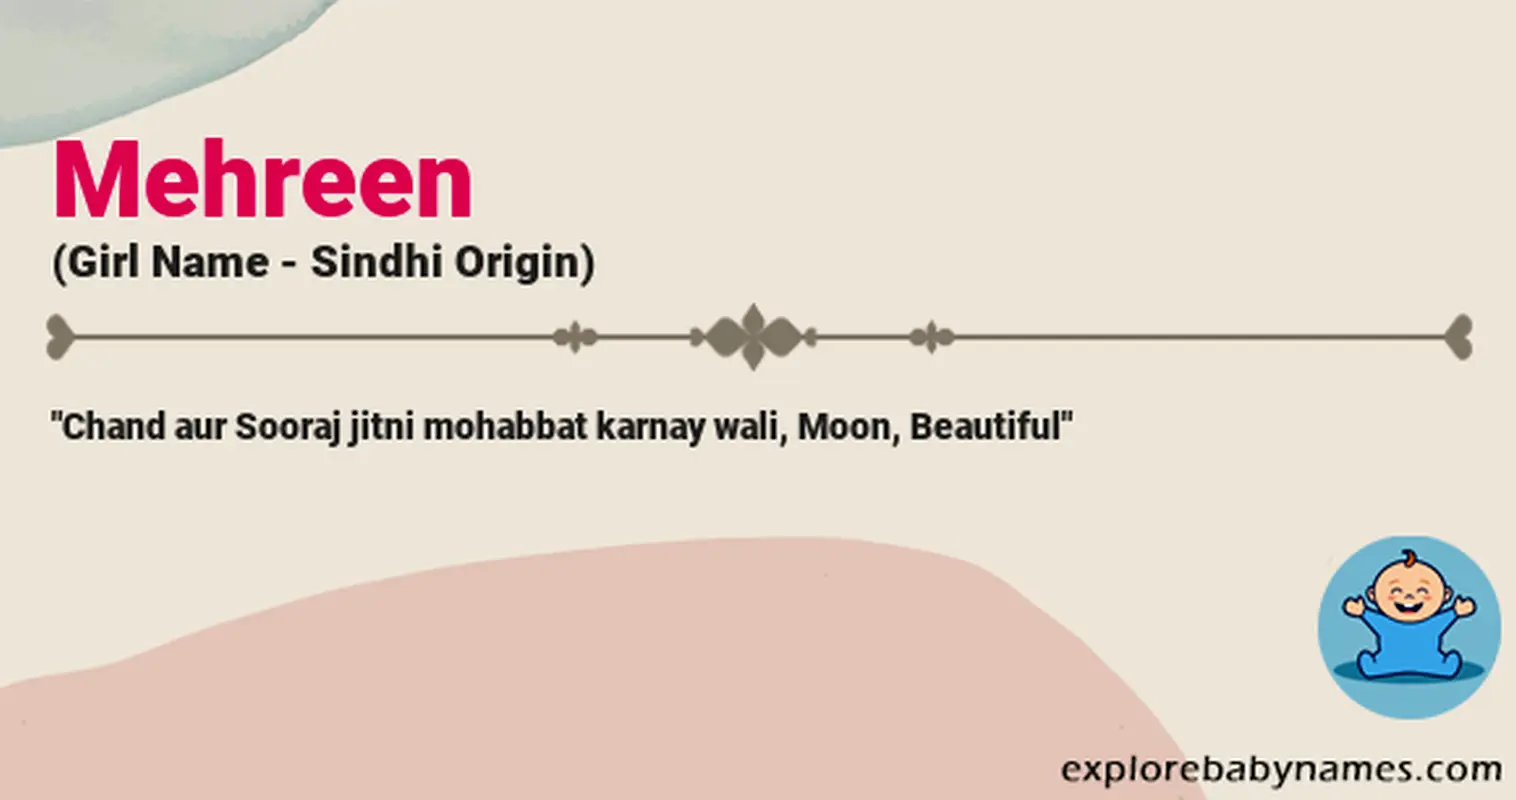 Meaning of Mehreen